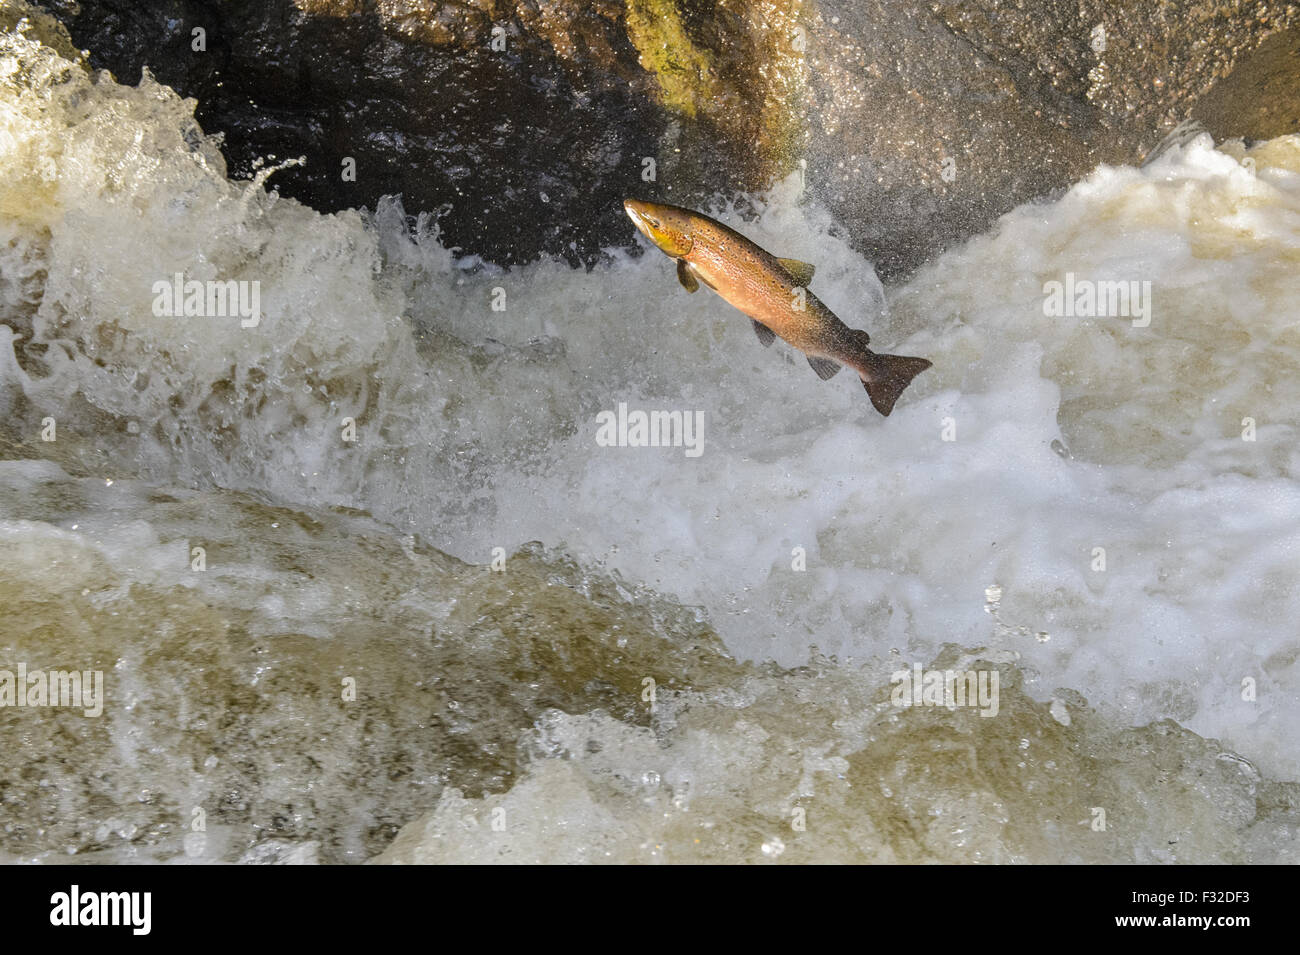 Atlantic Salmon (Salmo salar) adult, leaping up waterfall, moving upstream to spawning ground, Buchanty Spout, River Almond, Perth and Kinross, Scotland, November Stock Photo